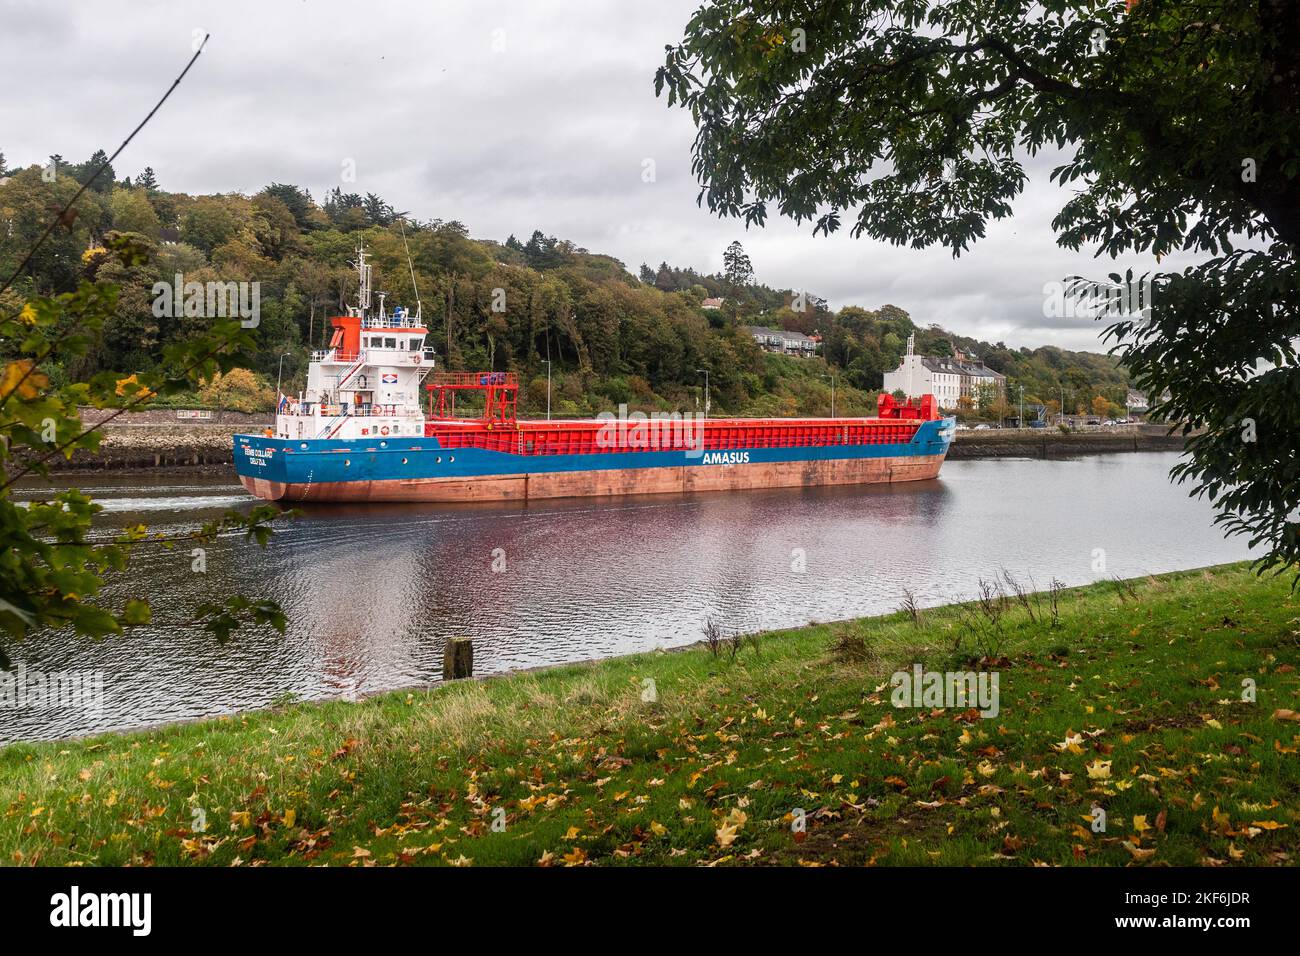 General cargo ship 'Eems Dollard' sails down the River Lee in Cork city, Ireland. Stock Photo